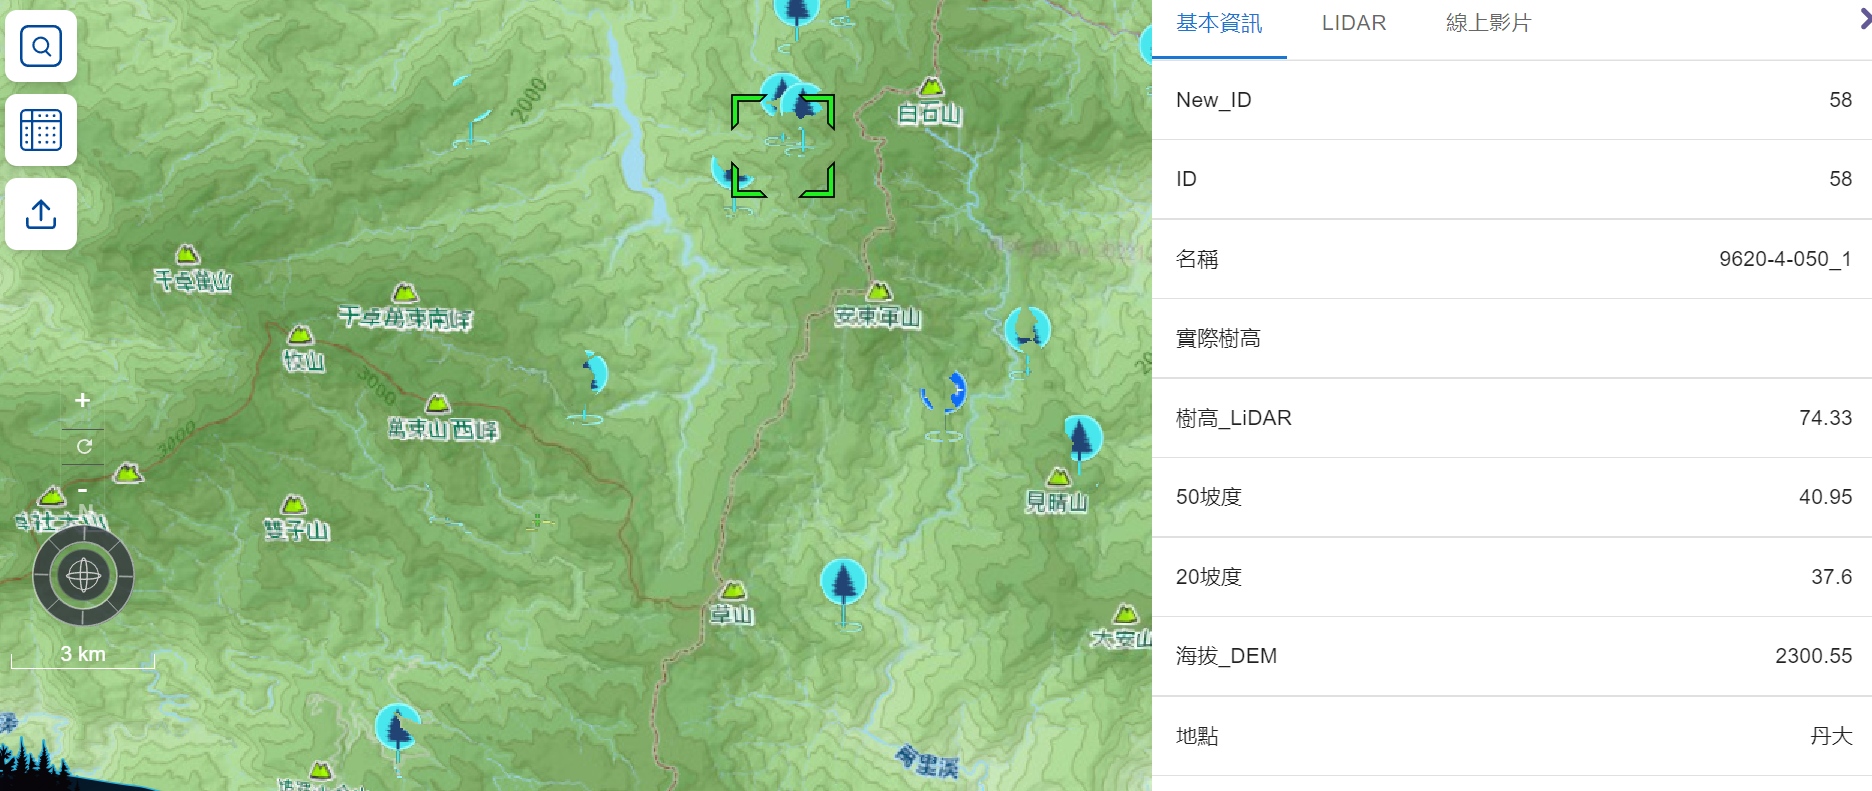 The map of tall trees in Taiwan